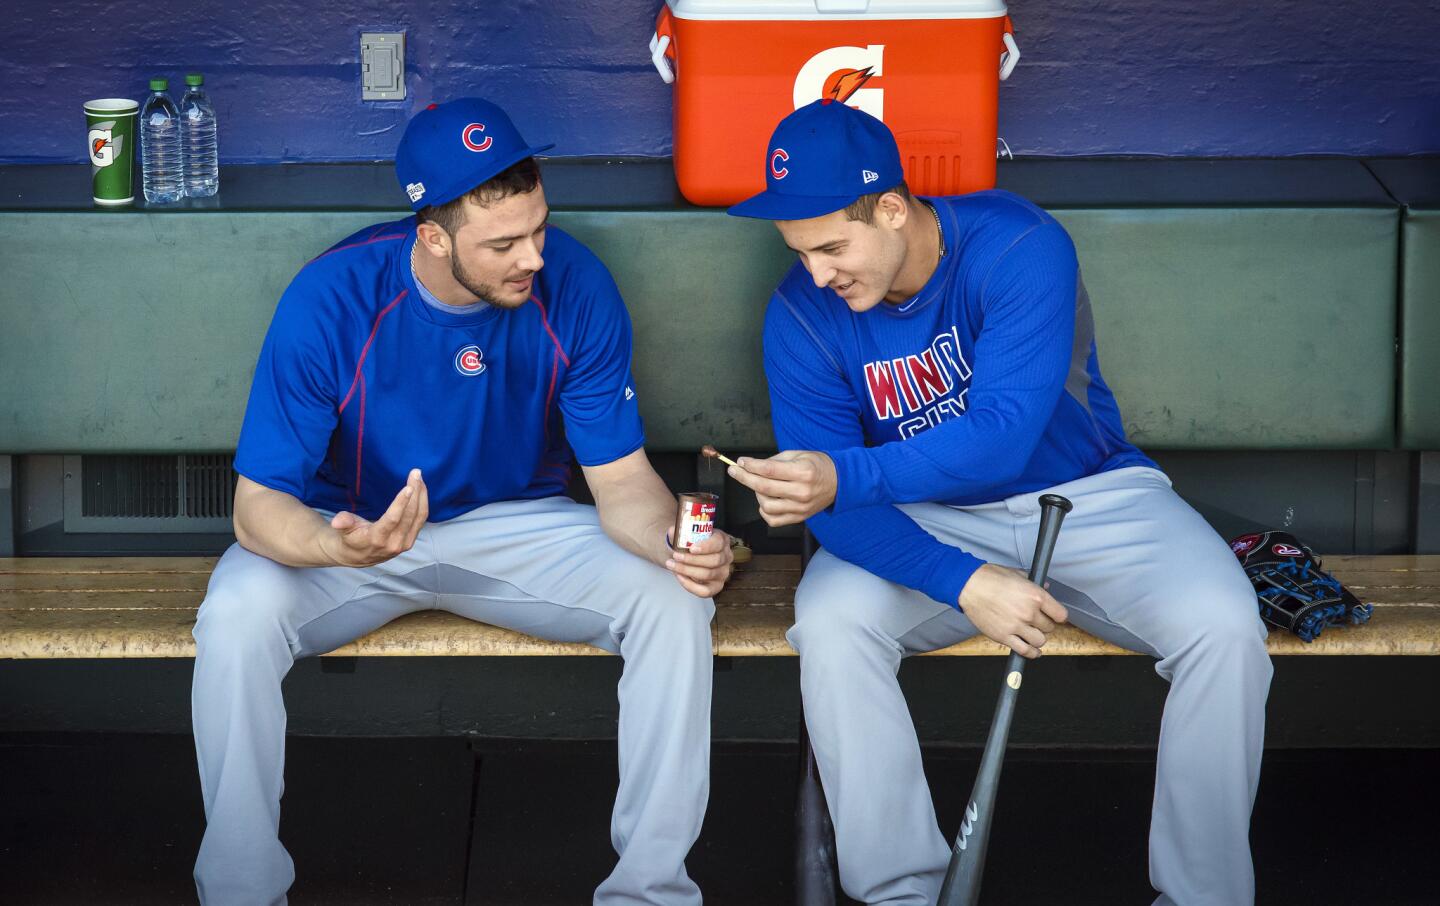 Kris Bryant and Anthony Rizzo share a snack in the dugout before their workout on Oct. 9, 2016, a day before Game 3 of their National League Division Series at AT&T Park in San Francisco.